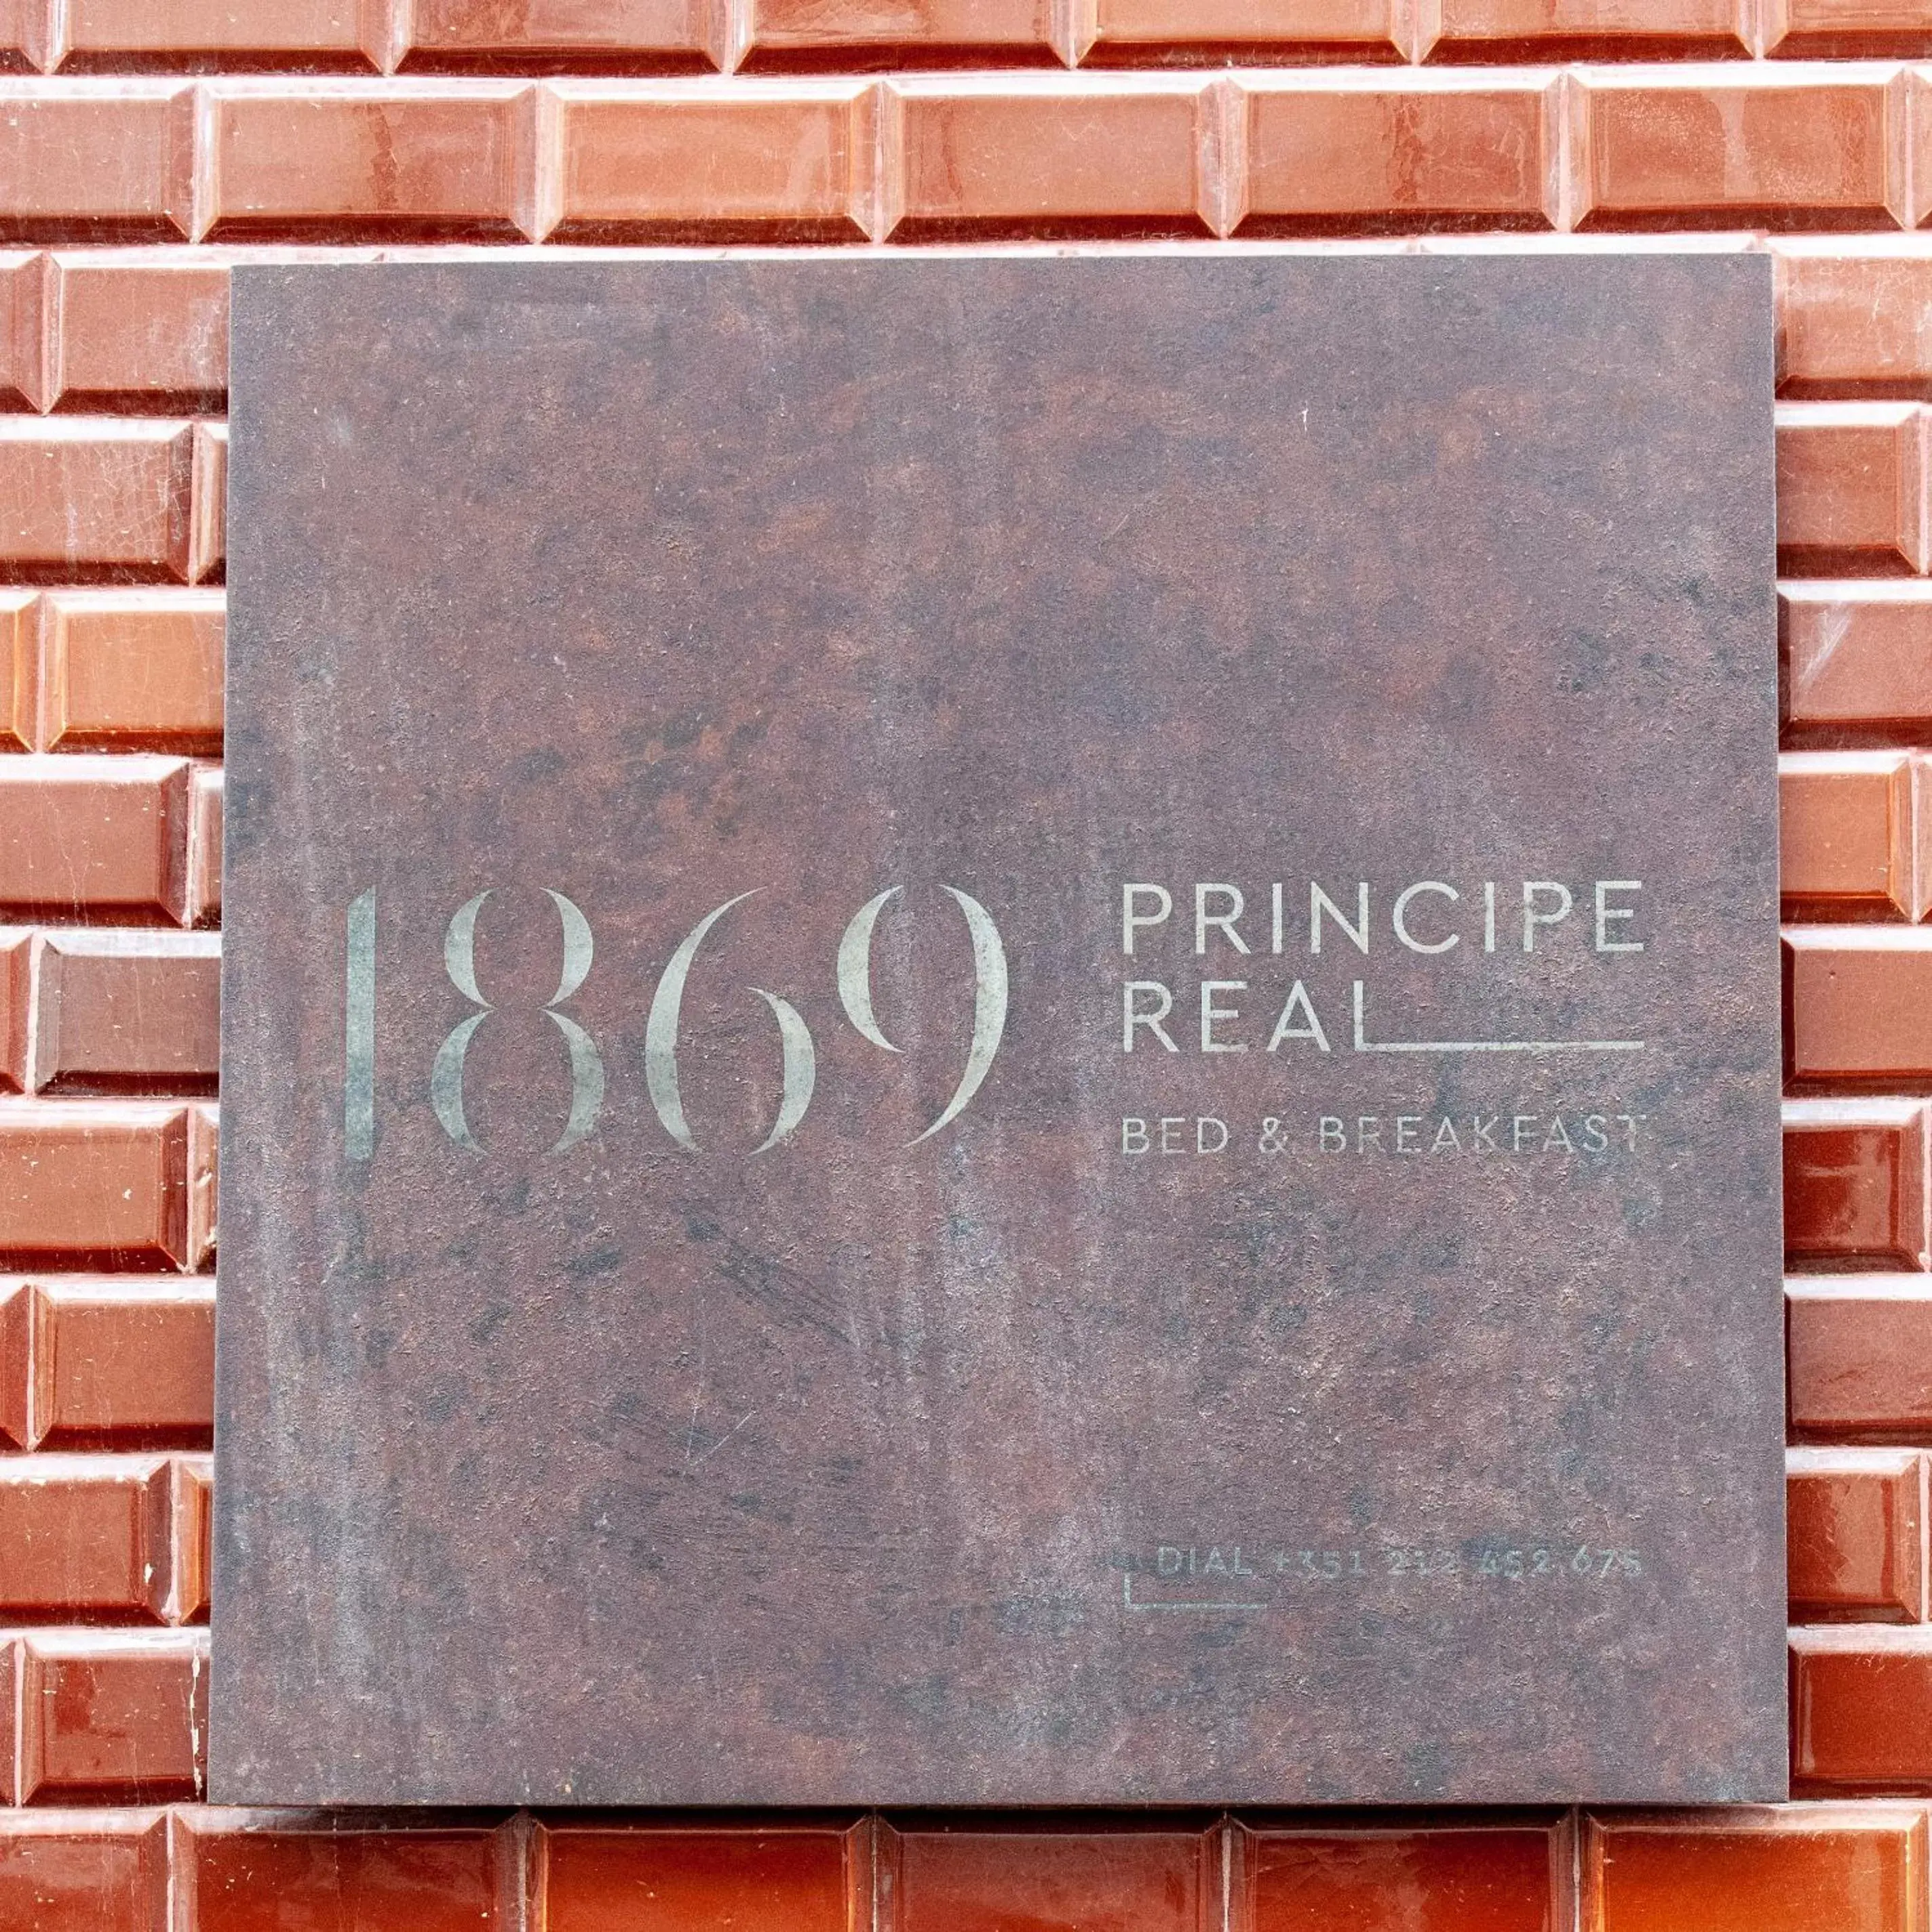 Property logo or sign in 1869 Príncipe Real House